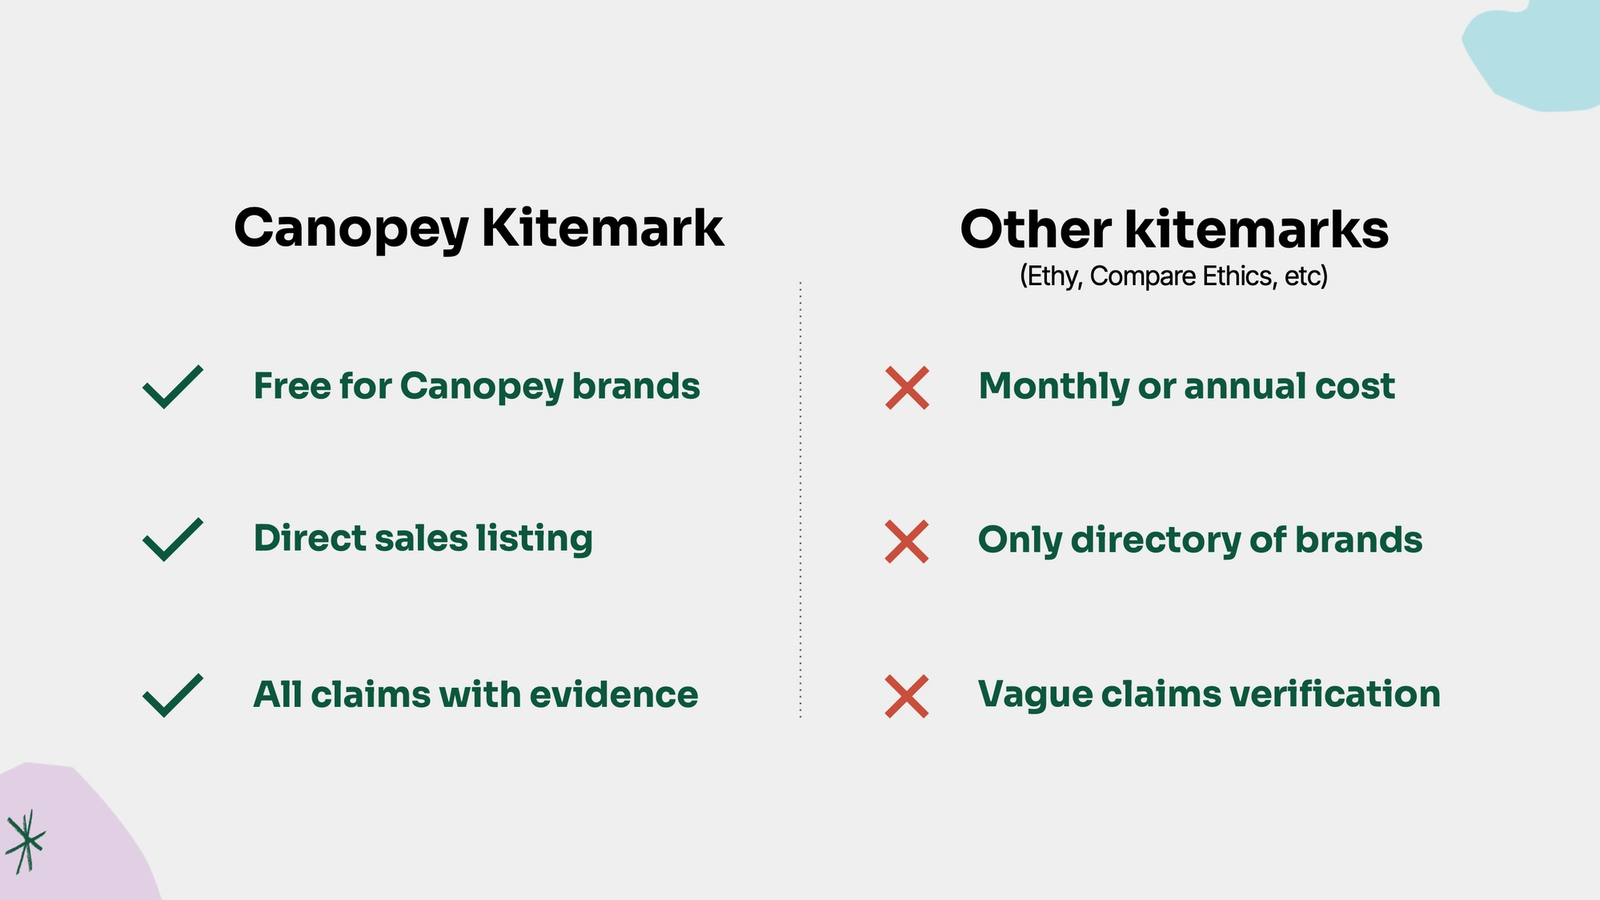 Benefits of the Canopey Kitemark vs others